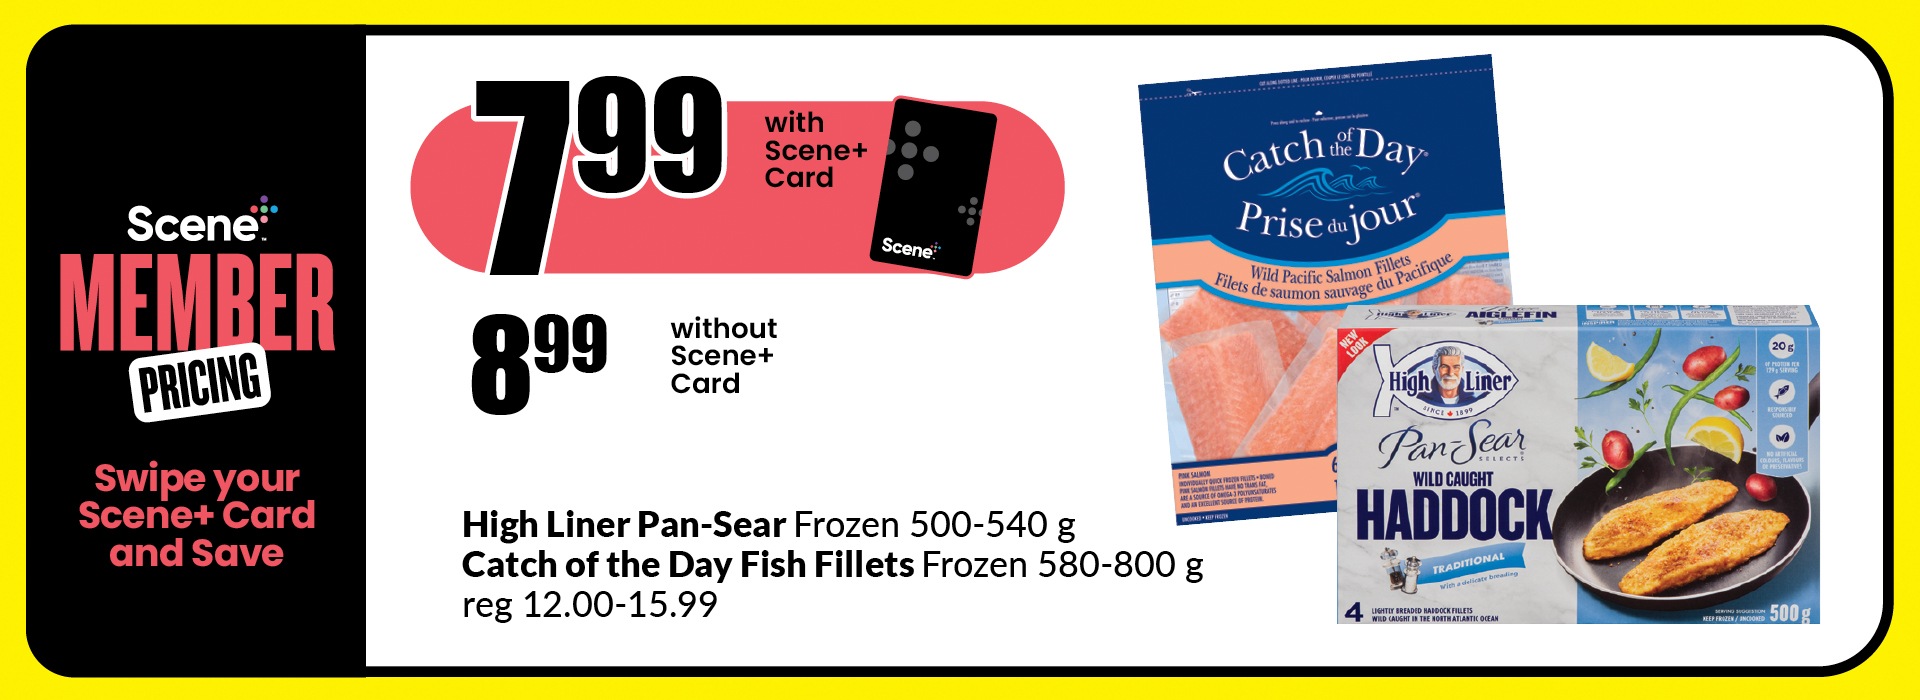 The following image contains the text, "Scene Member Pricing, Swipe your Scene+ Card and Save. Get it at $7.99 with the Scene+ Card and &8.99 without the Scene+ Card. High liner pan sear frozen 500-540g, Catch of the day fish fillets frozen 580-800 g reg 12.00 - 15.99."